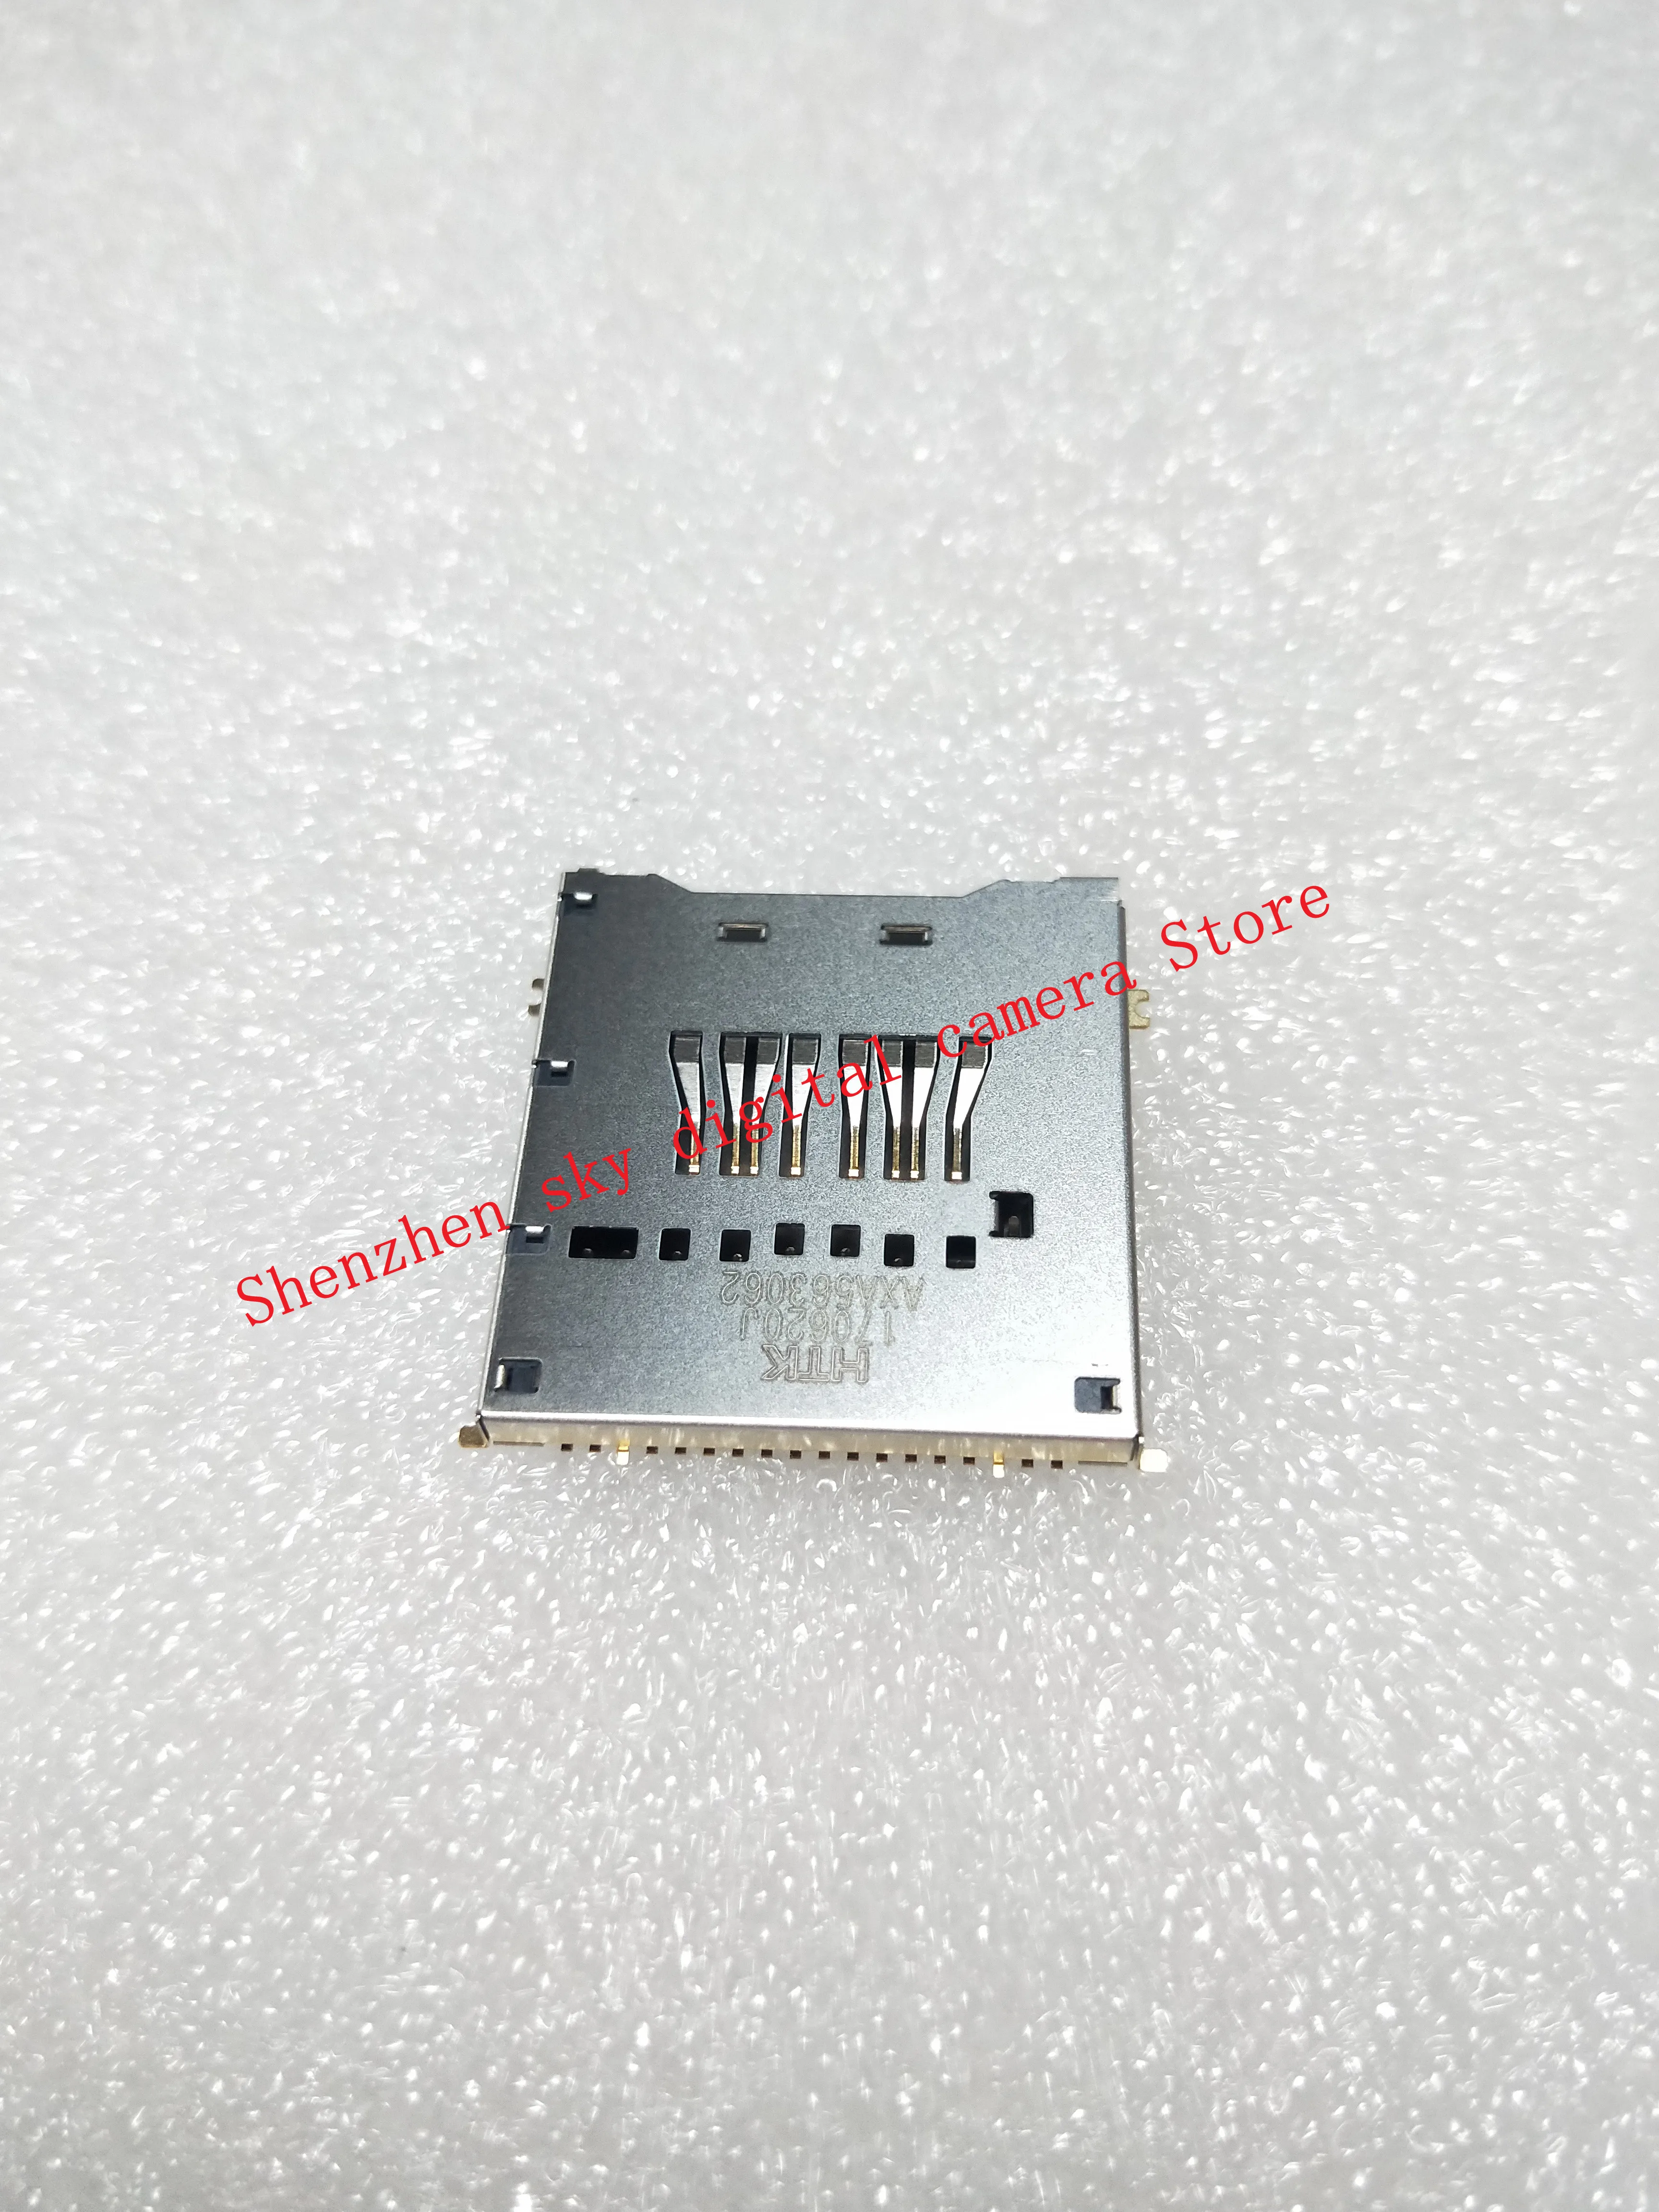 

New memory card slot unti repair parts for Sony ILCE-7M3 ILCE-7rM3 A7M3 A7rM3 A7III A7rIII camera